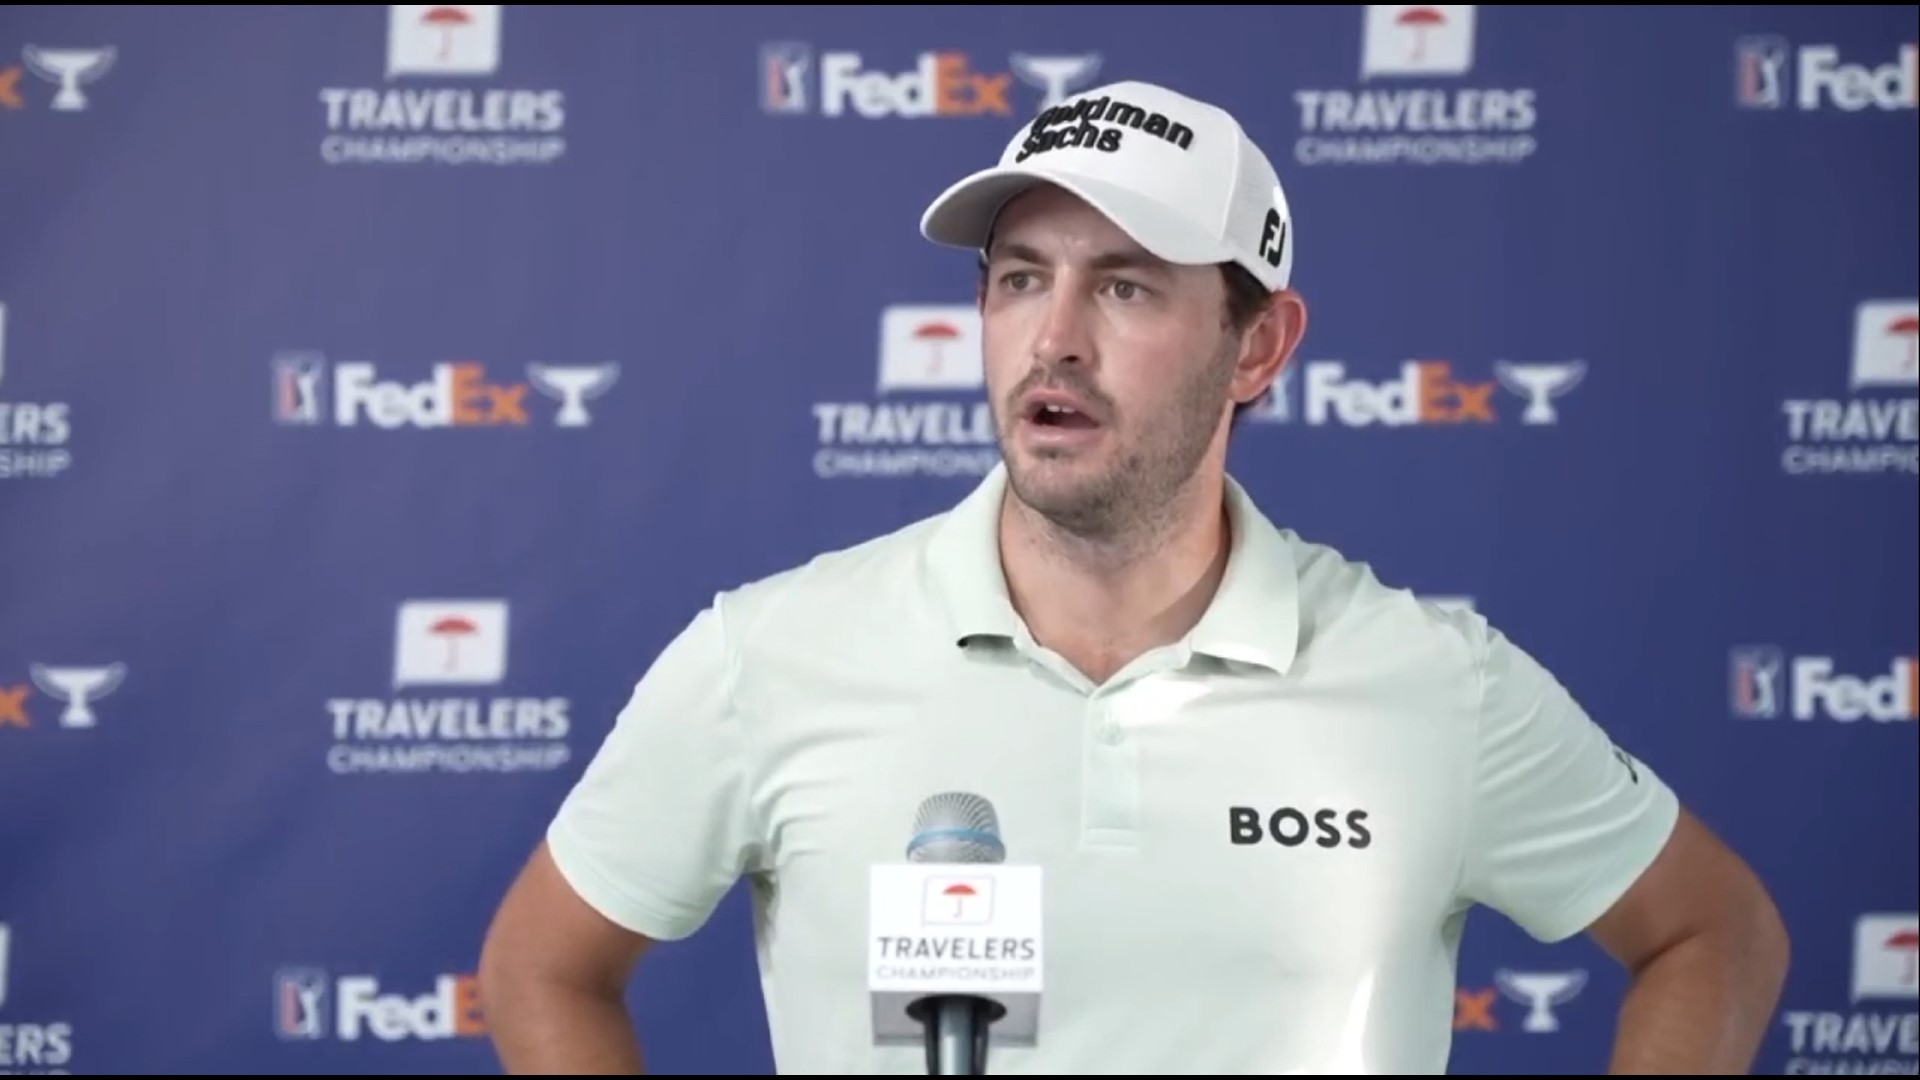 Cantley shot -6 in the third round of the Travelers Championship on Saturday, putting him one stroke back of first at -16.